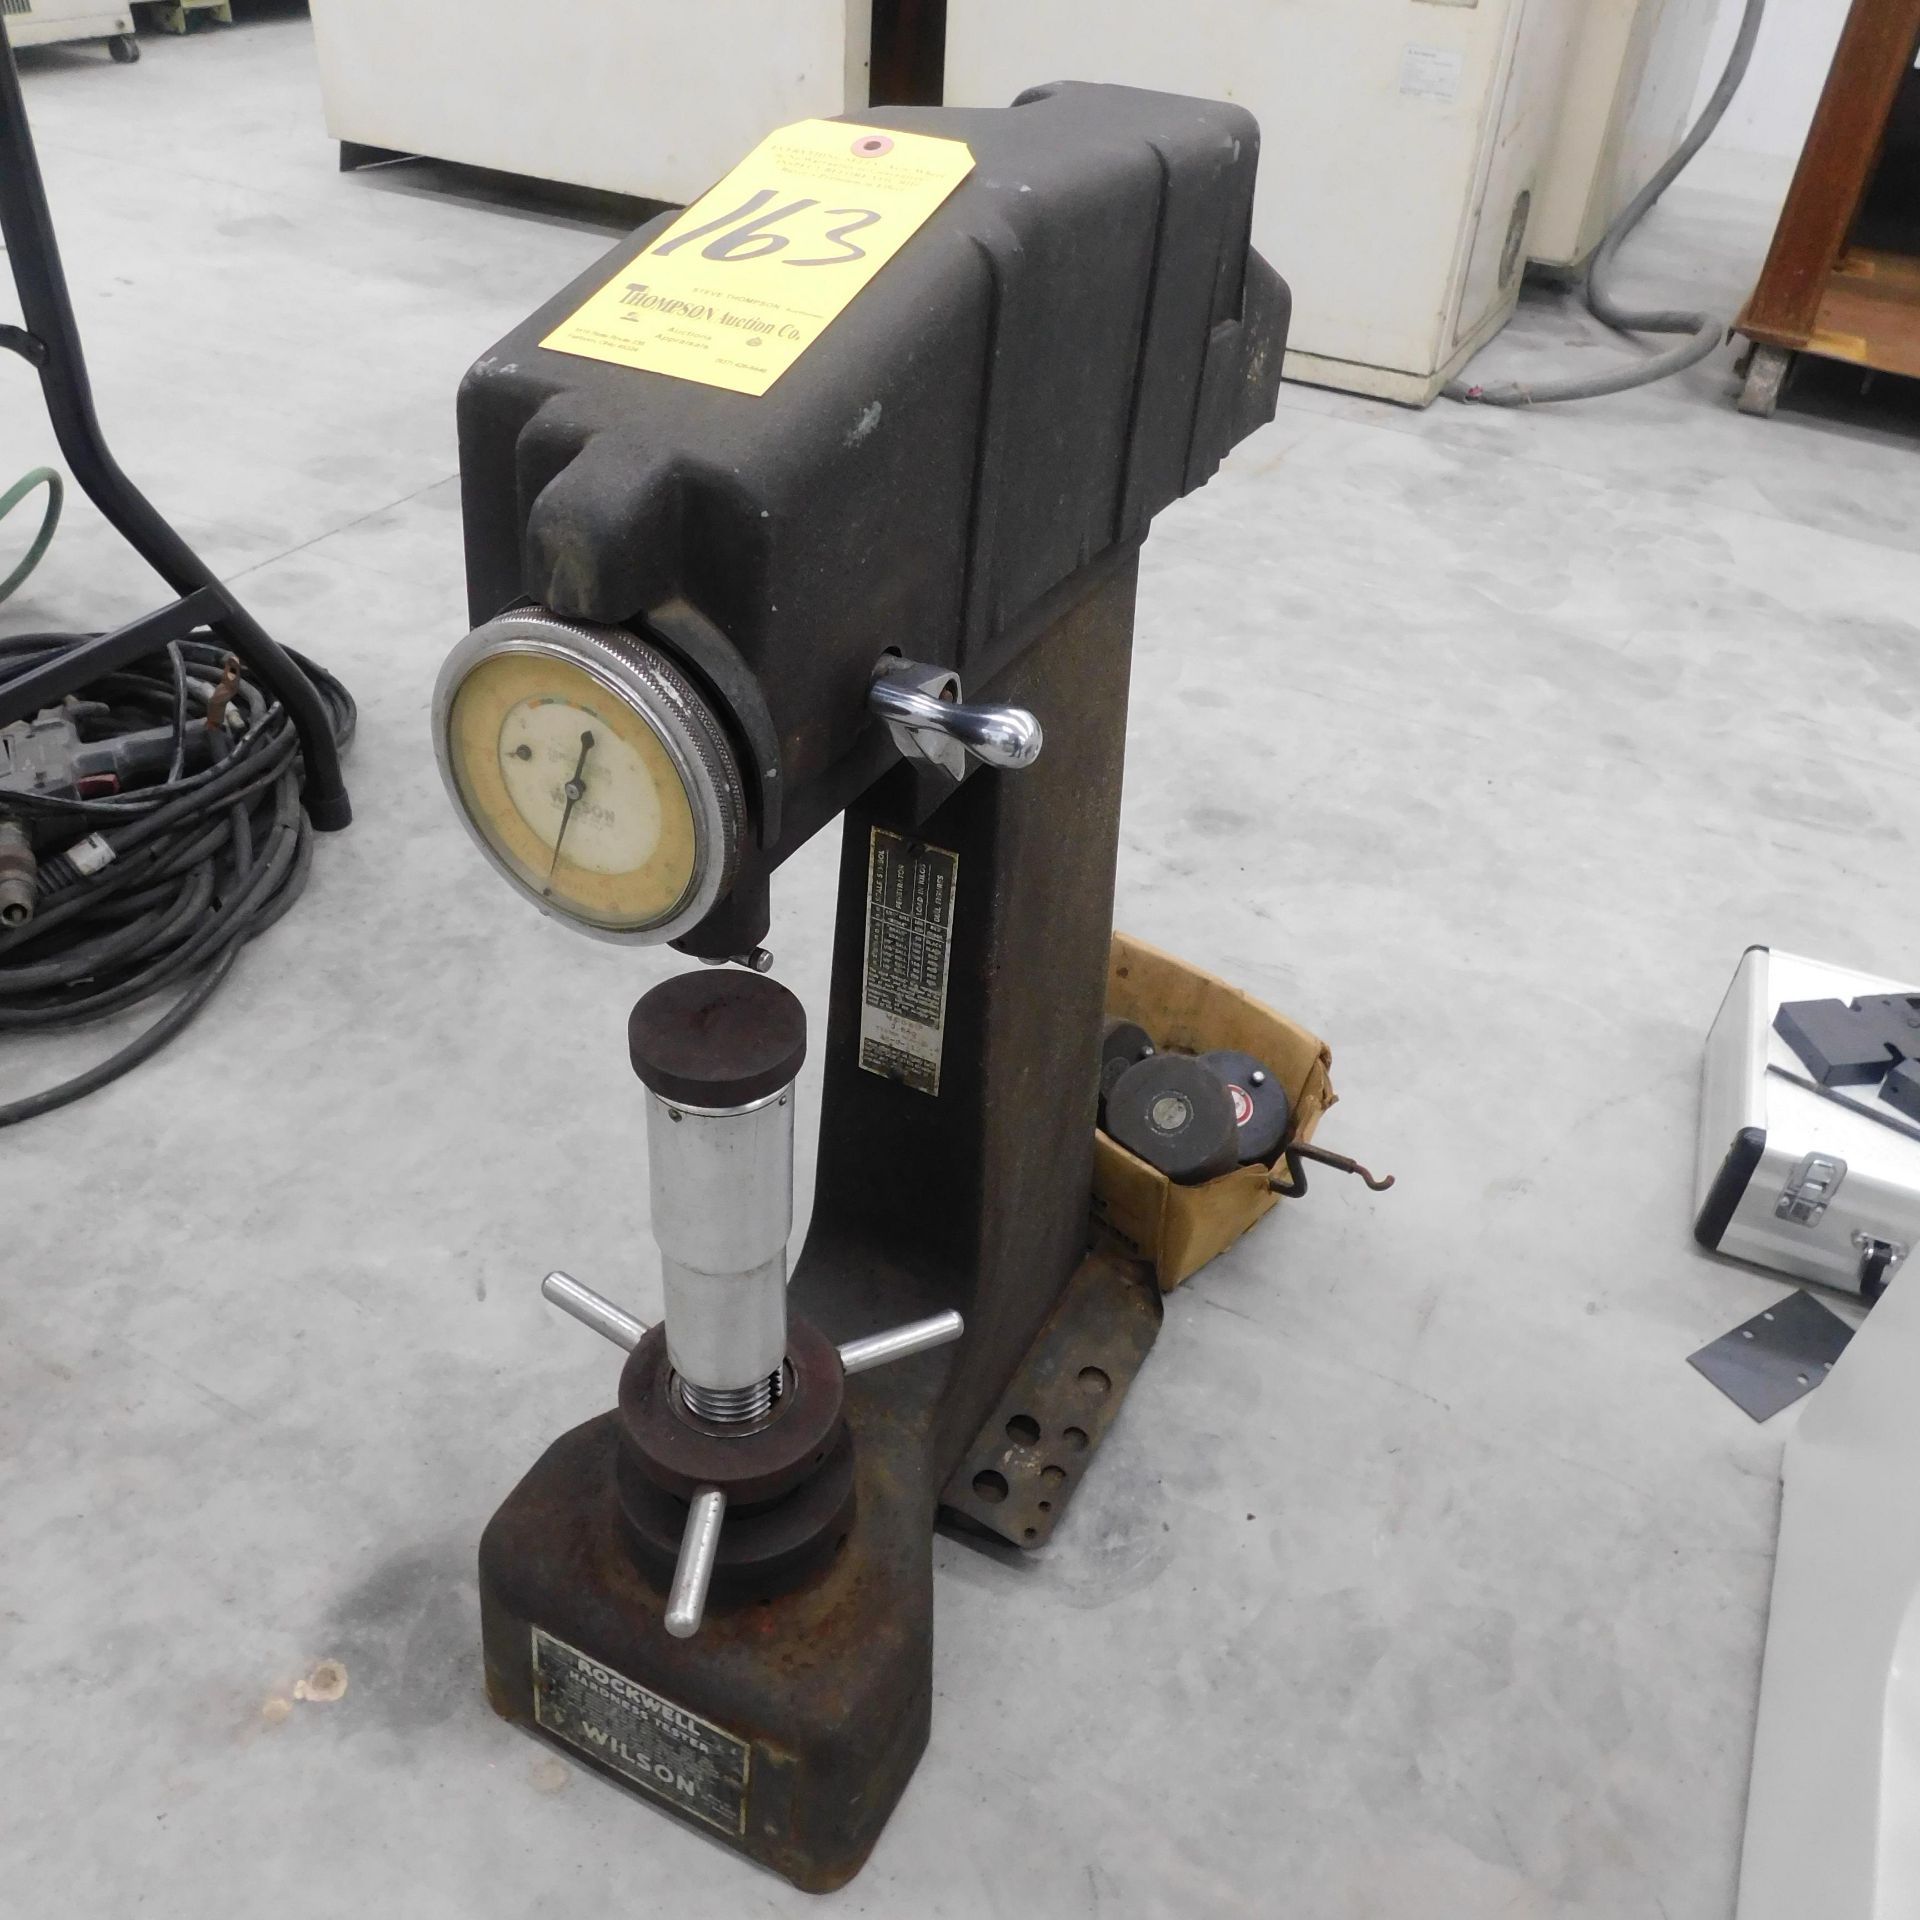 Wilson Rockwell Model 3RO Hardness Tester, s/n 3RO-112, with Weights and Attachments